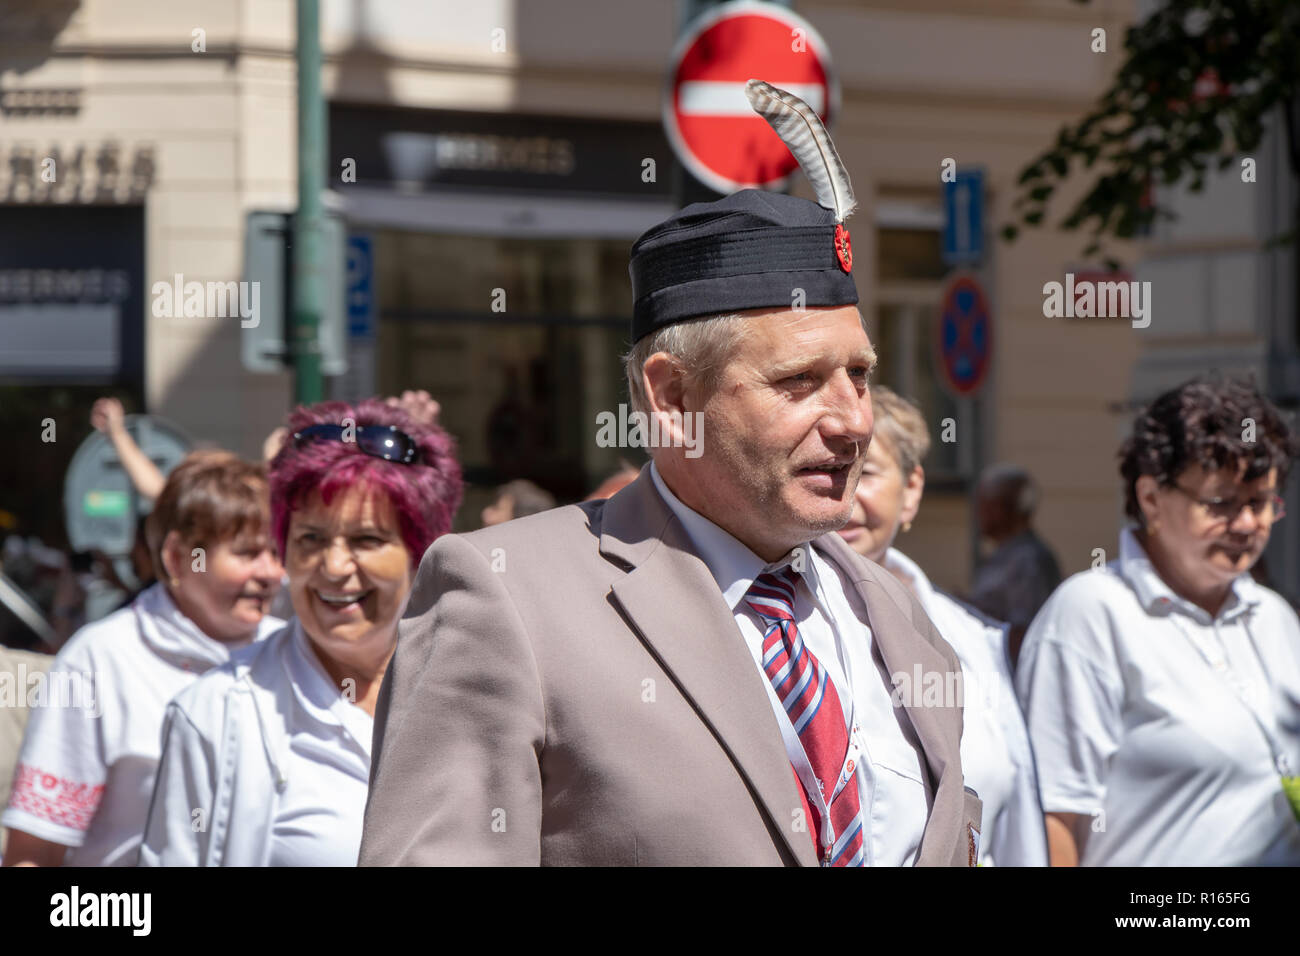 PRAGUE, CZECH REPUBLIC - JULY 1, 2018: People parading at Sokolsky Slet, a once-every-six-years gathering of the Sokol movement - a Czech sports assoc Stock Photo